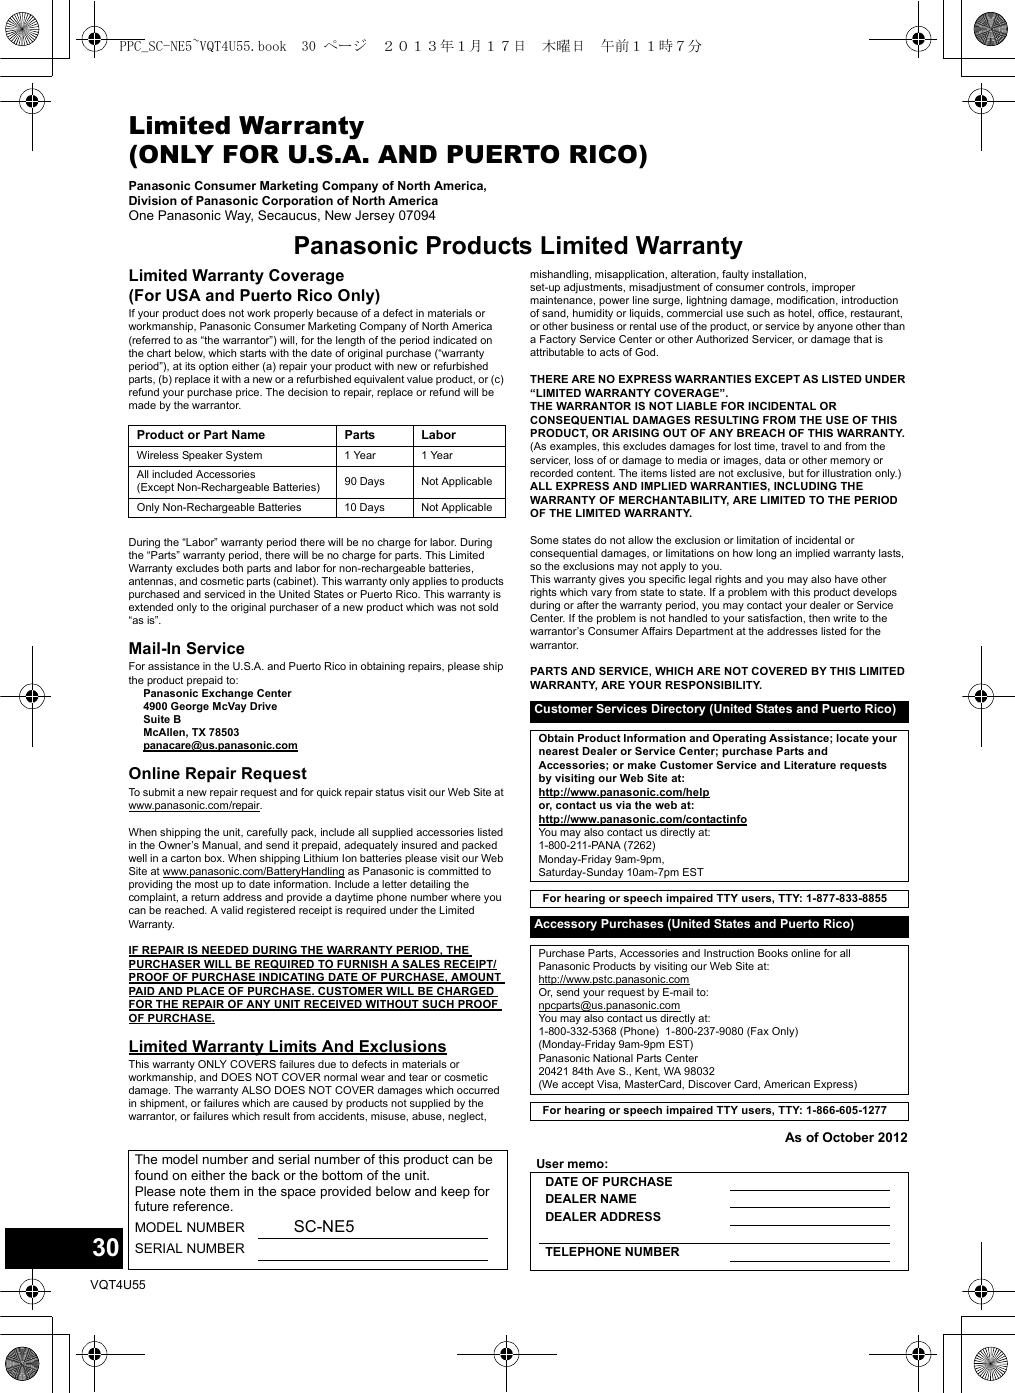 30VQT4U55Limited Warranty (ONLY FOR U.S.A. AND PUERTO RICO)Panasonic Consumer Marketing Company of North America, Division of Panasonic Corporation of North AmericaOne Panasonic Way, Secaucus, New Jersey 07094Panasonic Products Limited WarrantyLimited Warranty Coverage(For USA and Puerto Rico Only)If your product does not work properly because of a defect in materials or workmanship, Panasonic Consumer Marketing Company of North America (referred to as “the warrantor”) will, for the length of the period indicated on the chart below, which starts with the date of original purchase (“warranty period”), at its option either (a) repair your product with new or refurbished parts, (b) replace it with a new or a refurbished equivalent value product, or (c) refund your purchase price. The decision to repair, replace or refund will be made by the warrantor.During the “Labor” warranty period there will be no charge for labor. During the “Parts” warranty period, there will be no charge for parts. This Limited Warranty excludes both parts and labor for non-rechargeable batteries, antennas, and cosmetic parts (cabinet). This warranty only applies to products purchased and serviced in the United States or Puerto Rico. This warranty is extended only to the original purchaser of a new product which was not sold “as is”.Mail-In ServiceFor assistance in the U.S.A. and Puerto Rico in obtaining repairs, please ship the product prepaid to:Panasonic Exchange Center 4900 George McVay Drive Suite B McAllen, TX 78503panacare@us.panasonic.comOnline Repair RequestTo submit a new repair request and for quick repair status visit our Web Site at www.panasonic.com/repair.When shipping the unit, carefully pack, include all supplied accessories listed in the Owner’s Manual, and send it prepaid, adequately insured and packed well in a carton box. When shipping Lithium Ion batteries please visit our Web Site at www.panasonic.com/BatteryHandling as Panasonic is committed to providing the most up to date information. Include a letter detailing the complaint, a return address and provide a daytime phone number where you can be reached. A valid registered receipt is required under the Limited Warranty.IF REPAIR IS NEEDED DURING THE WARRANTY PERIOD, THE PURCHASER WILL BE REQUIRED TO FURNISH A SALES RECEIPT/PROOF OF PURCHASE INDICATING DATE OF PURCHASE, AMOUNT PAID AND PLACE OF PURCHASE. CUSTOMER WILL BE CHARGED FOR THE REPAIR OF ANY UNIT RECEIVED WITHOUT SUCH PROOF OF PURCHASE.Limited Warranty Limits And ExclusionsThis warranty ONLY COVERS failures due to defects in materials or workmanship, and DOES NOT COVER normal wear and tear or cosmetic damage. The warranty ALSO DOES NOT COVER damages which occurred in shipment, or failures which are caused by products not supplied by the warrantor, or failures which result from accidents, misuse, abuse, neglect, mishandling, misapplication, alteration, faulty installation, set-up adjustments, misadjustment of consumer controls, improper maintenance, power line surge, lightning damage, modification, introduction of sand, humidity or liquids, commercial use such as hotel, office, restaurant, or other business or rental use of the product, or service by anyone other than a Factory Service Center or other Authorized Servicer, or damage that is attributable to acts of God.THERE ARE NO EXPRESS WARRANTIES EXCEPT AS LISTED UNDER “LIMITED WARRANTY COVERAGE”.THE WARRANTOR IS NOT LIABLE FOR INCIDENTAL OR CONSEQUENTIAL DAMAGES RESULTING FROM THE USE OF THIS PRODUCT, OR ARISING OUT OF ANY BREACH OF THIS WARRANTY. (As examples, this excludes damages for lost time, travel to and from the servicer, loss of or damage to media or images, data or other memory or recorded content. The items listed are not exclusive, but for illustration only.)ALL EXPRESS AND IMPLIED WARRANTIES, INCLUDING THE WARRANTY OF MERCHANTABILITY, ARE LIMITED TO THE PERIOD OF THE LIMITED WARRANTY.Some states do not allow the exclusion or limitation of incidental or consequential damages, or limitations on how long an implied warranty lasts, so the exclusions may not apply to you.This warranty gives you specific legal rights and you may also have other rights which vary from state to state. If a problem with this product develops during or after the warranty period, you may contact your dealer or Service Center. If the problem is not handled to your satisfaction, then write to the warrantor’s Consumer Affairs Department at the addresses listed for the warrantor.PARTS AND SERVICE, WHICH ARE NOT COVERED BY THIS LIMITED WARRANTY, ARE YOUR RESPONSIBILITY.As of October 2012Product or Part Name Parts LaborWireless Speaker System 1 Year 1 YearAll included Accessories(Except Non-Rechargeable Batteries) 90 Days Not ApplicableOnly Non-Rechargeable Batteries 10 Days Not ApplicableCustomer Services Directory (United States and Puerto Rico)Obtain Product Information and Operating Assistance; locate your nearest Dealer or Service Center; purchase Parts and Accessories; or make Customer Service and Literature requests by visiting our Web Site at:http://www.panasonic.com/helpor, contact us via the web at:http://www.panasonic.com/contactinfoYou may also contact us directly at:1-800-211-PANA (7262)Monday-Friday 9am-9pm, Saturday-Sunday 10am-7pm ESTFor hearing or speech impaired TTY users, TTY: 1-877-833-8855Accessory Purchases (United States and Puerto Rico)Purchase Parts, Accessories and Instruction Books online for all Panasonic Products by visiting our Web Site at: http://www.pstc.panasonic.comOr, send your request by E-mail to: npcparts@us.panasonic.comYou may also contact us directly at:1-800-332-5368 (Phone)  1-800-237-9080 (Fax Only)(Monday-Friday 9am-9pm EST)Panasonic National Parts Center20421 84th Ave S., Kent, WA 98032(We accept Visa, MasterCard, Discover Card, American Express)For hearing or speech impaired TTY users, TTY: 1-866-605-1277The model number and serial number of this product can be found on either the back or the bottom of the unit.Please note them in the space provided below and keep for future reference.MODEL NUMBER SC-NE5SERIAL NUMBER User memo:DATE OF PURCHASE DEALER NAME DEALER ADDRESSTELEPHONE NUMBERPPC_SC-NE5~VQT4U55.book  30 ページ  ２０１３年１月１７日　木曜日　午前１１時７分